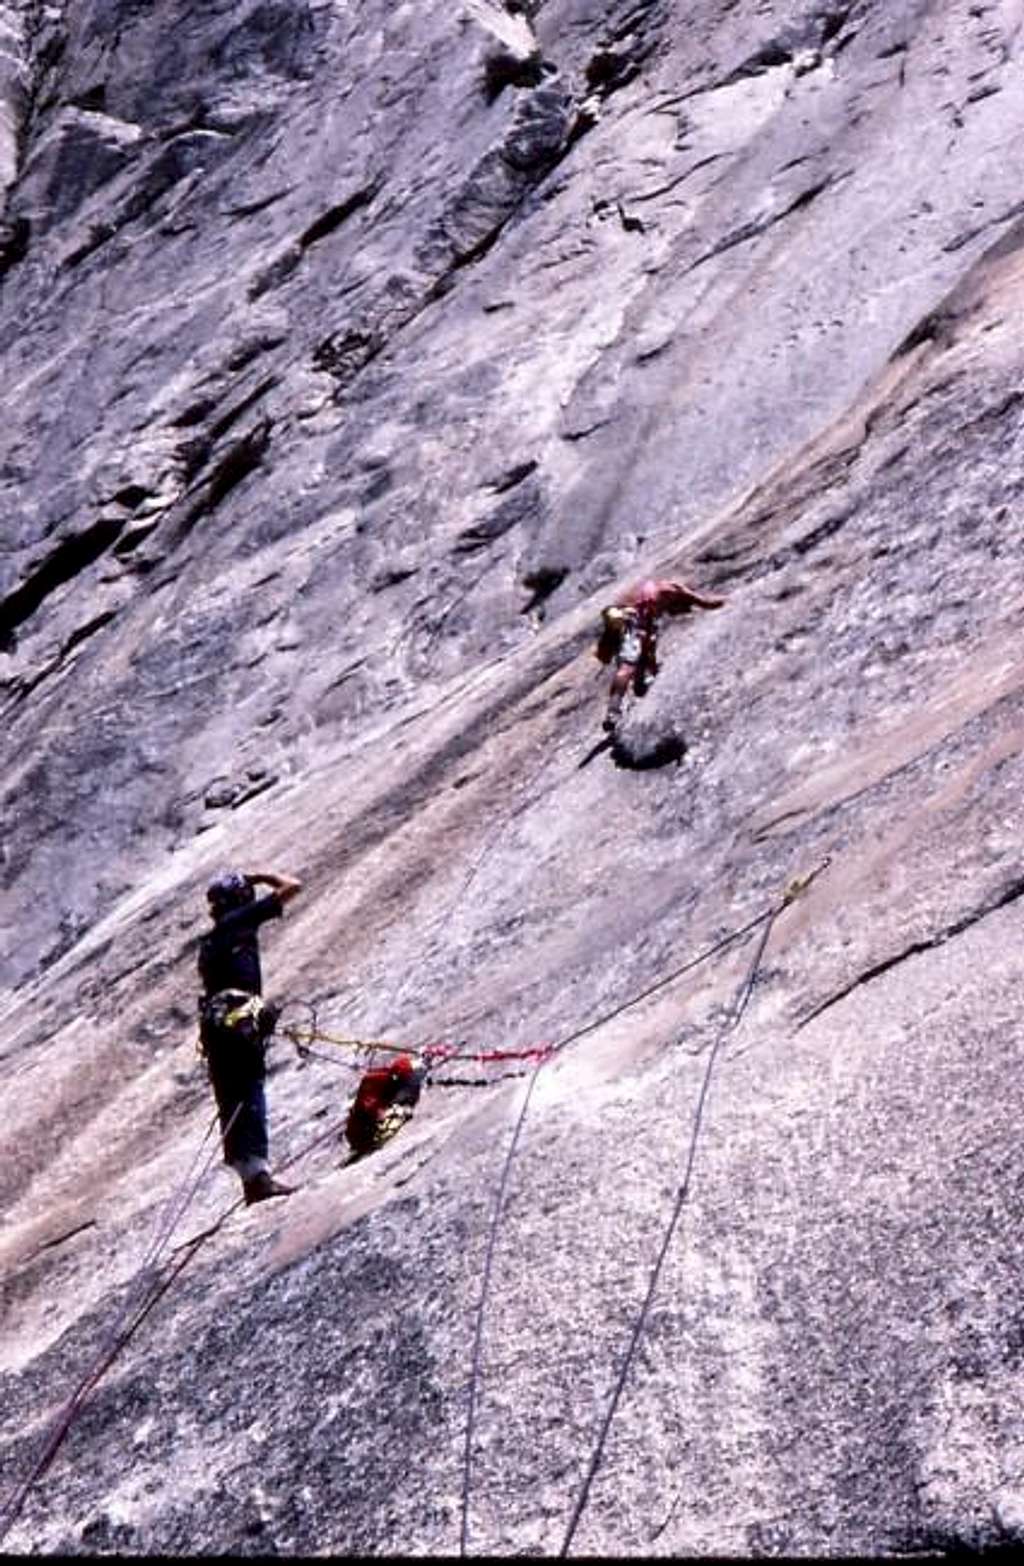 On the 1st ascent of 